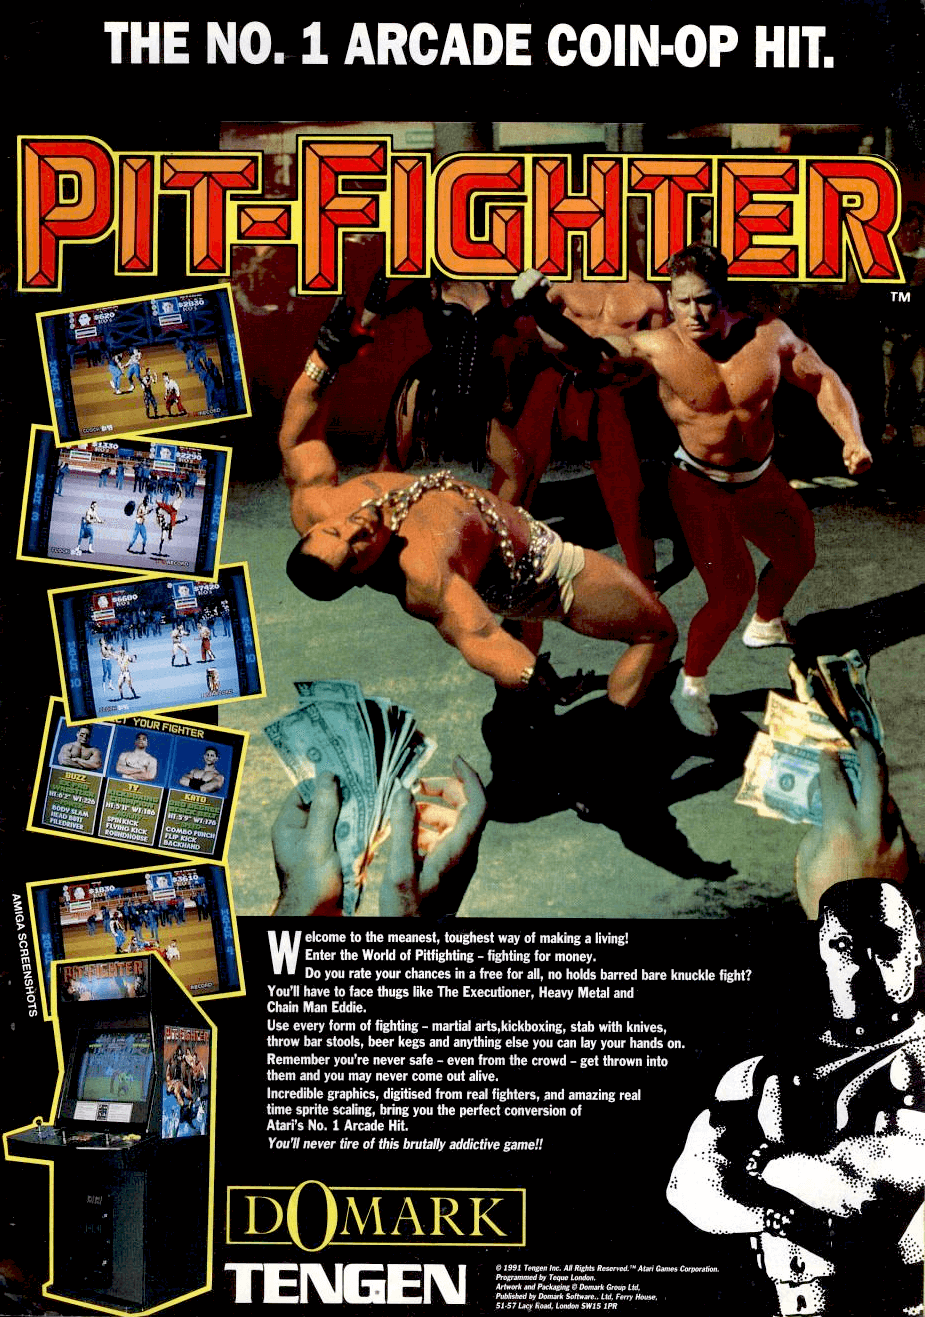 Image For Post | Description
Pit-Fighter is a 3rd-person fight game that features digitized graphics of real fighters and zooming effects. Players select one of three fighters (Buzz, Ty or Kato) to take on anyone who dares. At the conclusion of a match, players are individually awarded a Knockout Bonus, Brutality Bonus, and a Fight Purse. Every third match is a Grudge Match where players test the skills of each other. The last man standing is the winner of this three-knockdown match. Players fight their way to the Elimination Match to decide who wins the opportunity to dethrone the champion, the Masked Warrior.

Trivia

[Graphics - Arcade] 
The graphical animations for the player character and opponents were created through a bluescreen process, where the various poses and moves were performed by real actors in front of a video camera. The game's on-screen character animation are replays of the actual footage, not a rotoscoped (redrawn) animation as is common in other games. Pit-Fighter is the second [arcade] fighting game to use digitized sprites, after Home Data's Reikai Dōshi: Chinese Exorcist. 

Cancelled Atari 7800 version
Atari had a 7800 port underway, outsourced to Imagitec Design, but abandoned it around 1992.

DOS version
The DOS port of Pit-Fighter inexplicably uses a sprite resizing algorithm that stretches only vertically, not horizontally. This results in very odd-looking "skinny" fighters onscreen (as well as almost everything else). 

- In February 1993, the Spectrum version was released as part of the Super Fighter compilation with Final Fight and WWF Wrestlemania. 

- Handheld versions were released for the Atari Lynx and the Game Boy in 1992. Tiger Electronics released its own dedicated handheld version of the game.

- An emulated version of the arcade game is featured in the 2004's Midway Arcade Treasures 2 for GameCube, PlayStation 2, and Xbox, as well as Midway Arcade Treasures Deluxe Edition (2006) for Microsoft Windows. This version runs at a faster speed than the arcade original. Pit-Fighter was also included in the 2012 compilation Midway Arcade Origins.

[Sequel] 
Electronic Gaming Monthly has a two-page preview of the planned sequel which the magazine claimed was more than 75% finished and would be released for Genesis[/Mega Drive] in the 4th quarter of 1993. Kato, Buzz, and Ty were returning along with three new selectable fighters: Connor (Karate Champion), Tanya (Roller Queen), and Chief (Ex-bodyguard) — three of the playable characters that were ultimately featured in Atari's subsequent game, Guardians of the 'Hood. Pictures show two CPU fighters, Helga (level 1) and Jay-Jay (level 2).[10]

Alternate Titles

    "Pit-Fighter: The Ultimate Competition" -- Full title
    "PitFighter: The Ultimate Challenge" -- SEGA Master System in-game title
    "ピットファイター" -- Japanese spelling
    "피트 파이터" -- Korean spelling